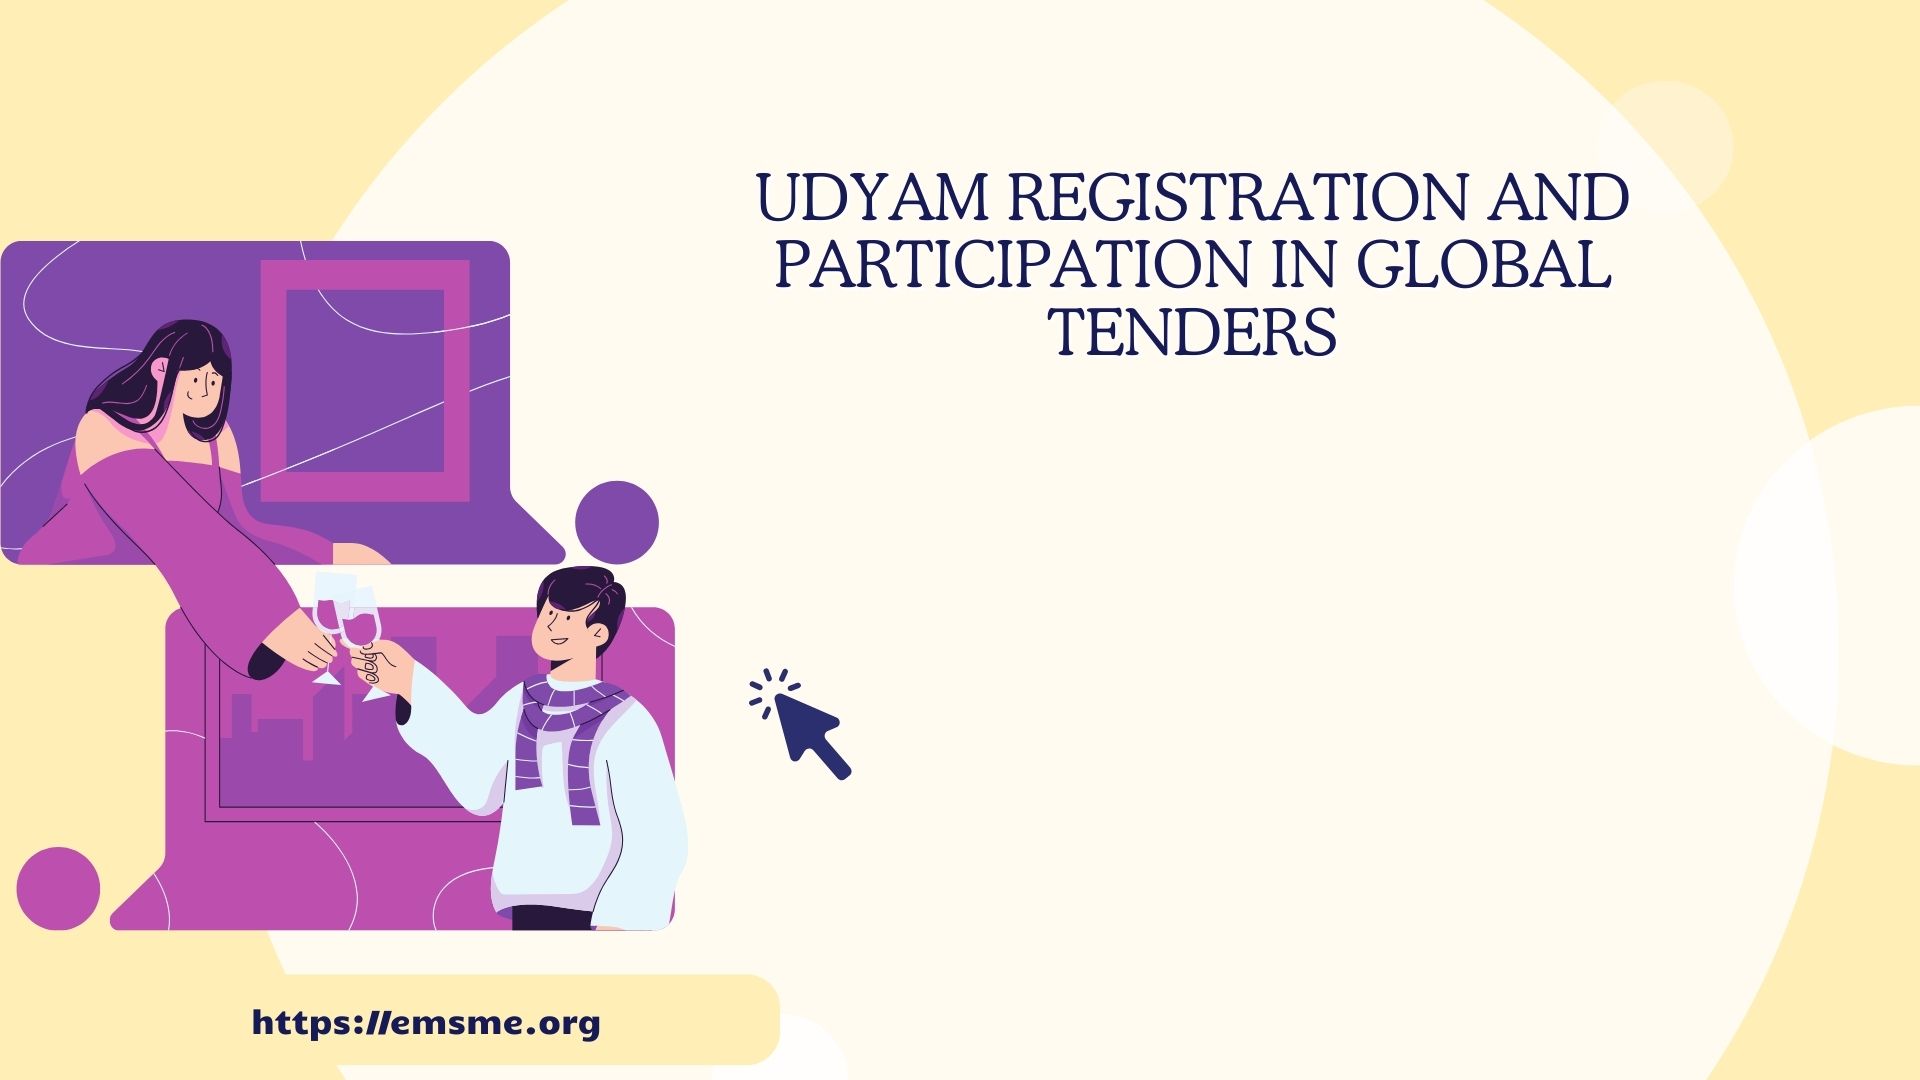 Udyam Registration and Participation in Global Tenders (1)